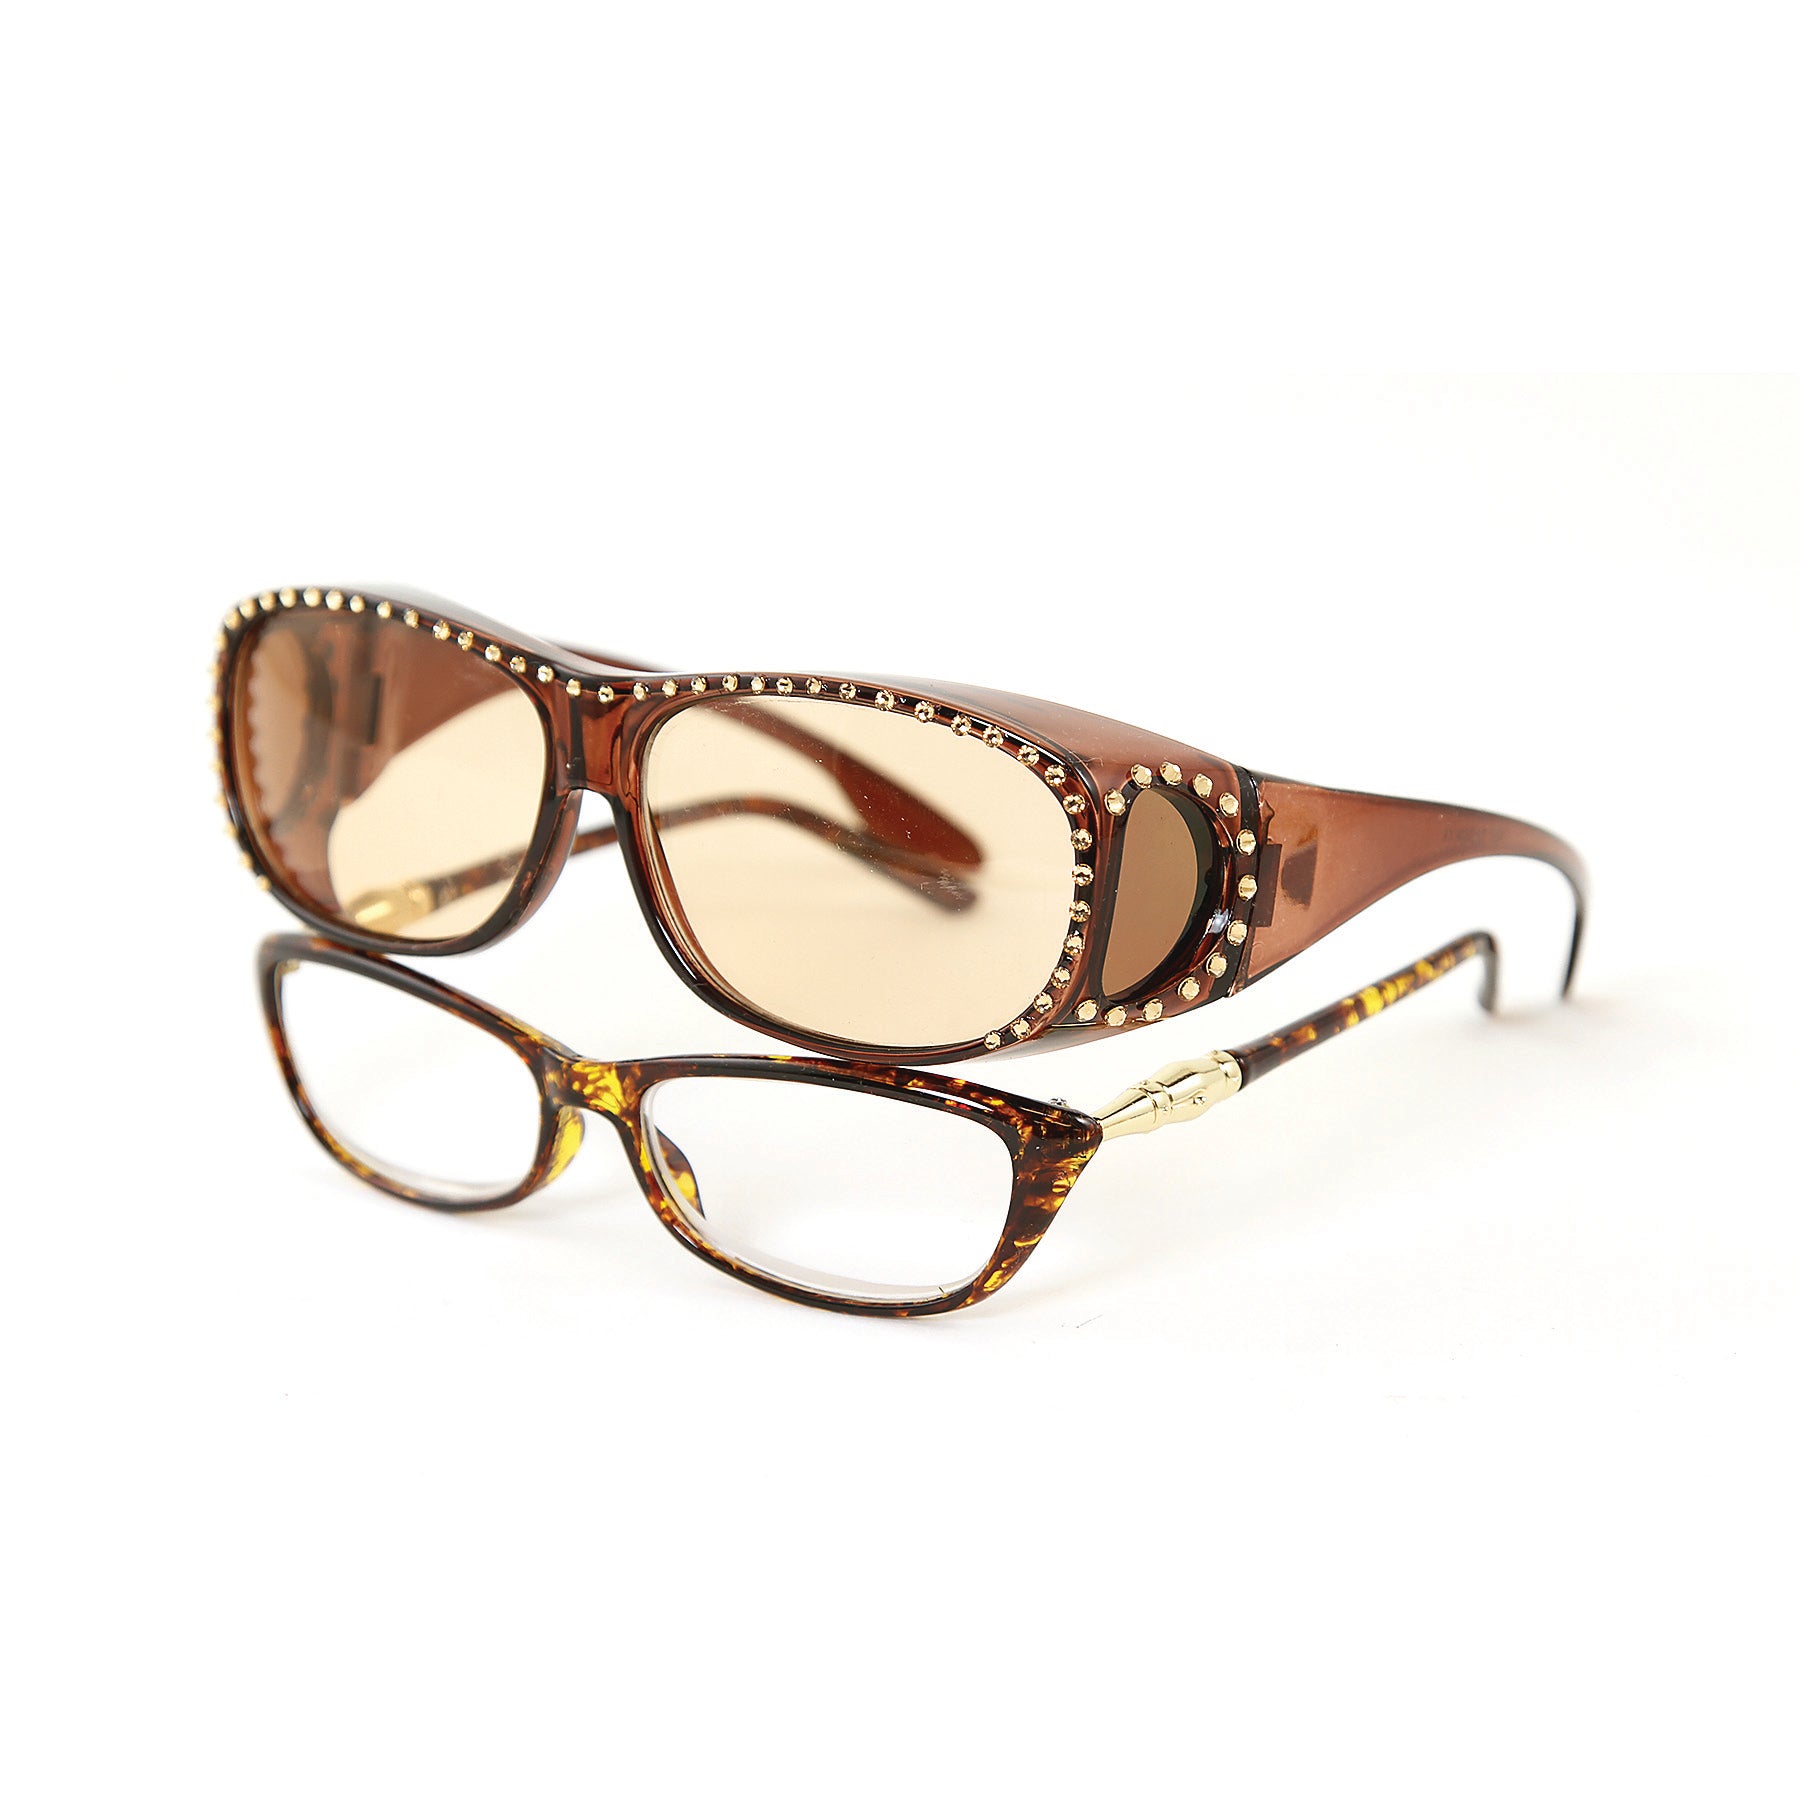 Sunglasses Made with Swarovski Elements, brown color, side view, 2 piece view